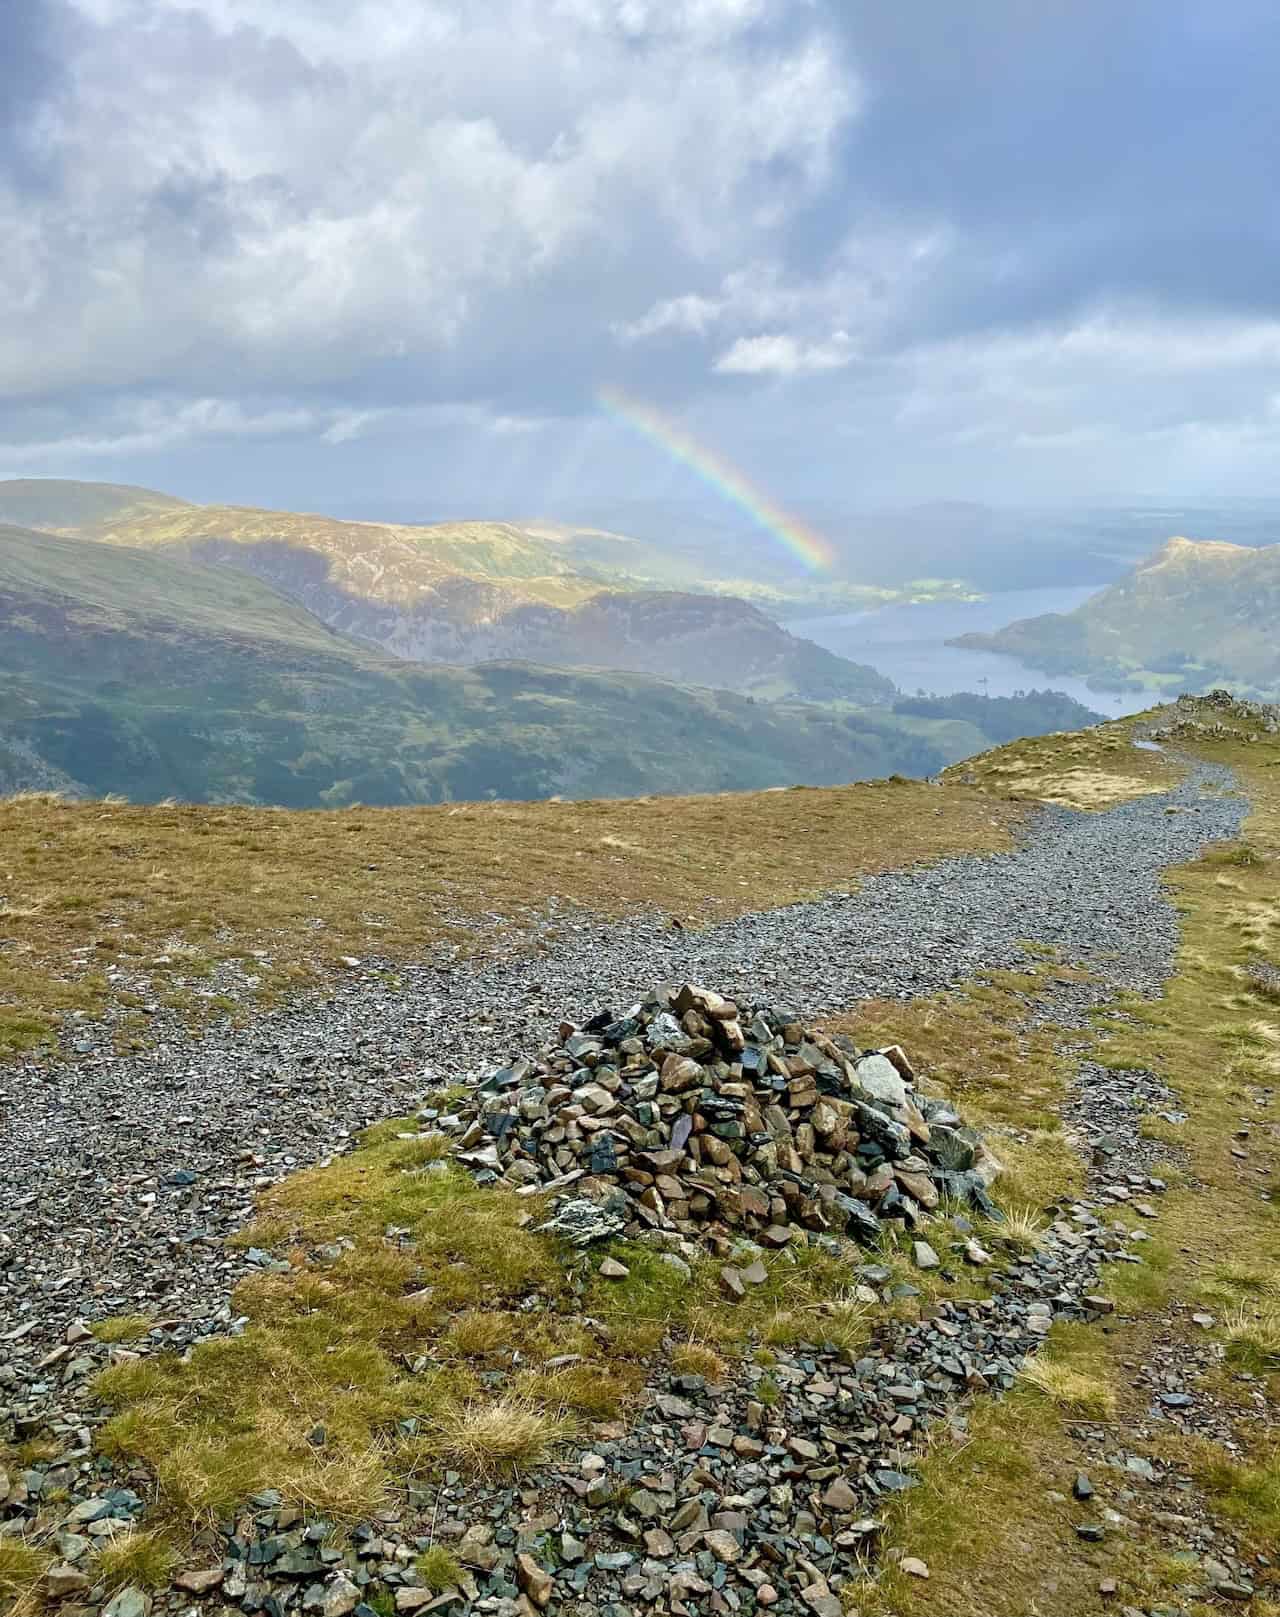 A rainbow appears as we approach the top of St Sunday Crag.